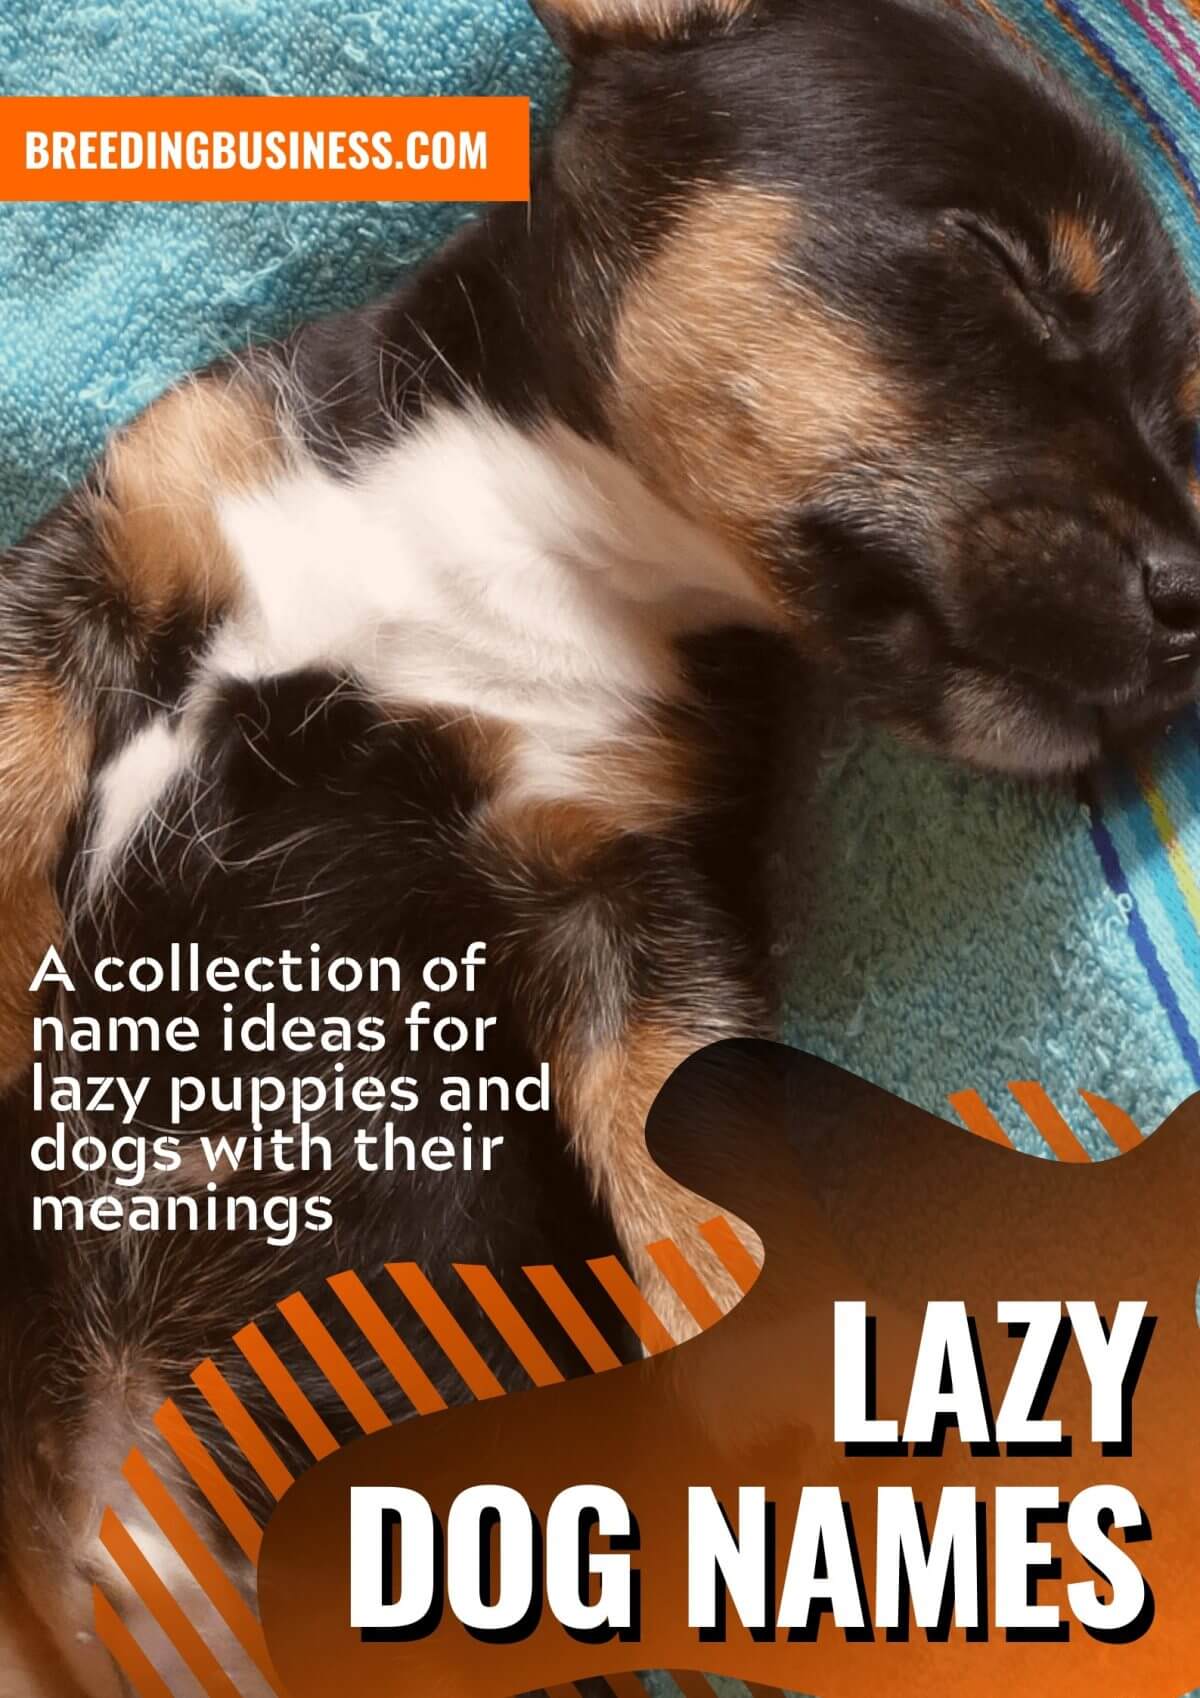 100+ Lazy Dog Names – Top Name Ideas for Lazy, Low-Energy Puppies